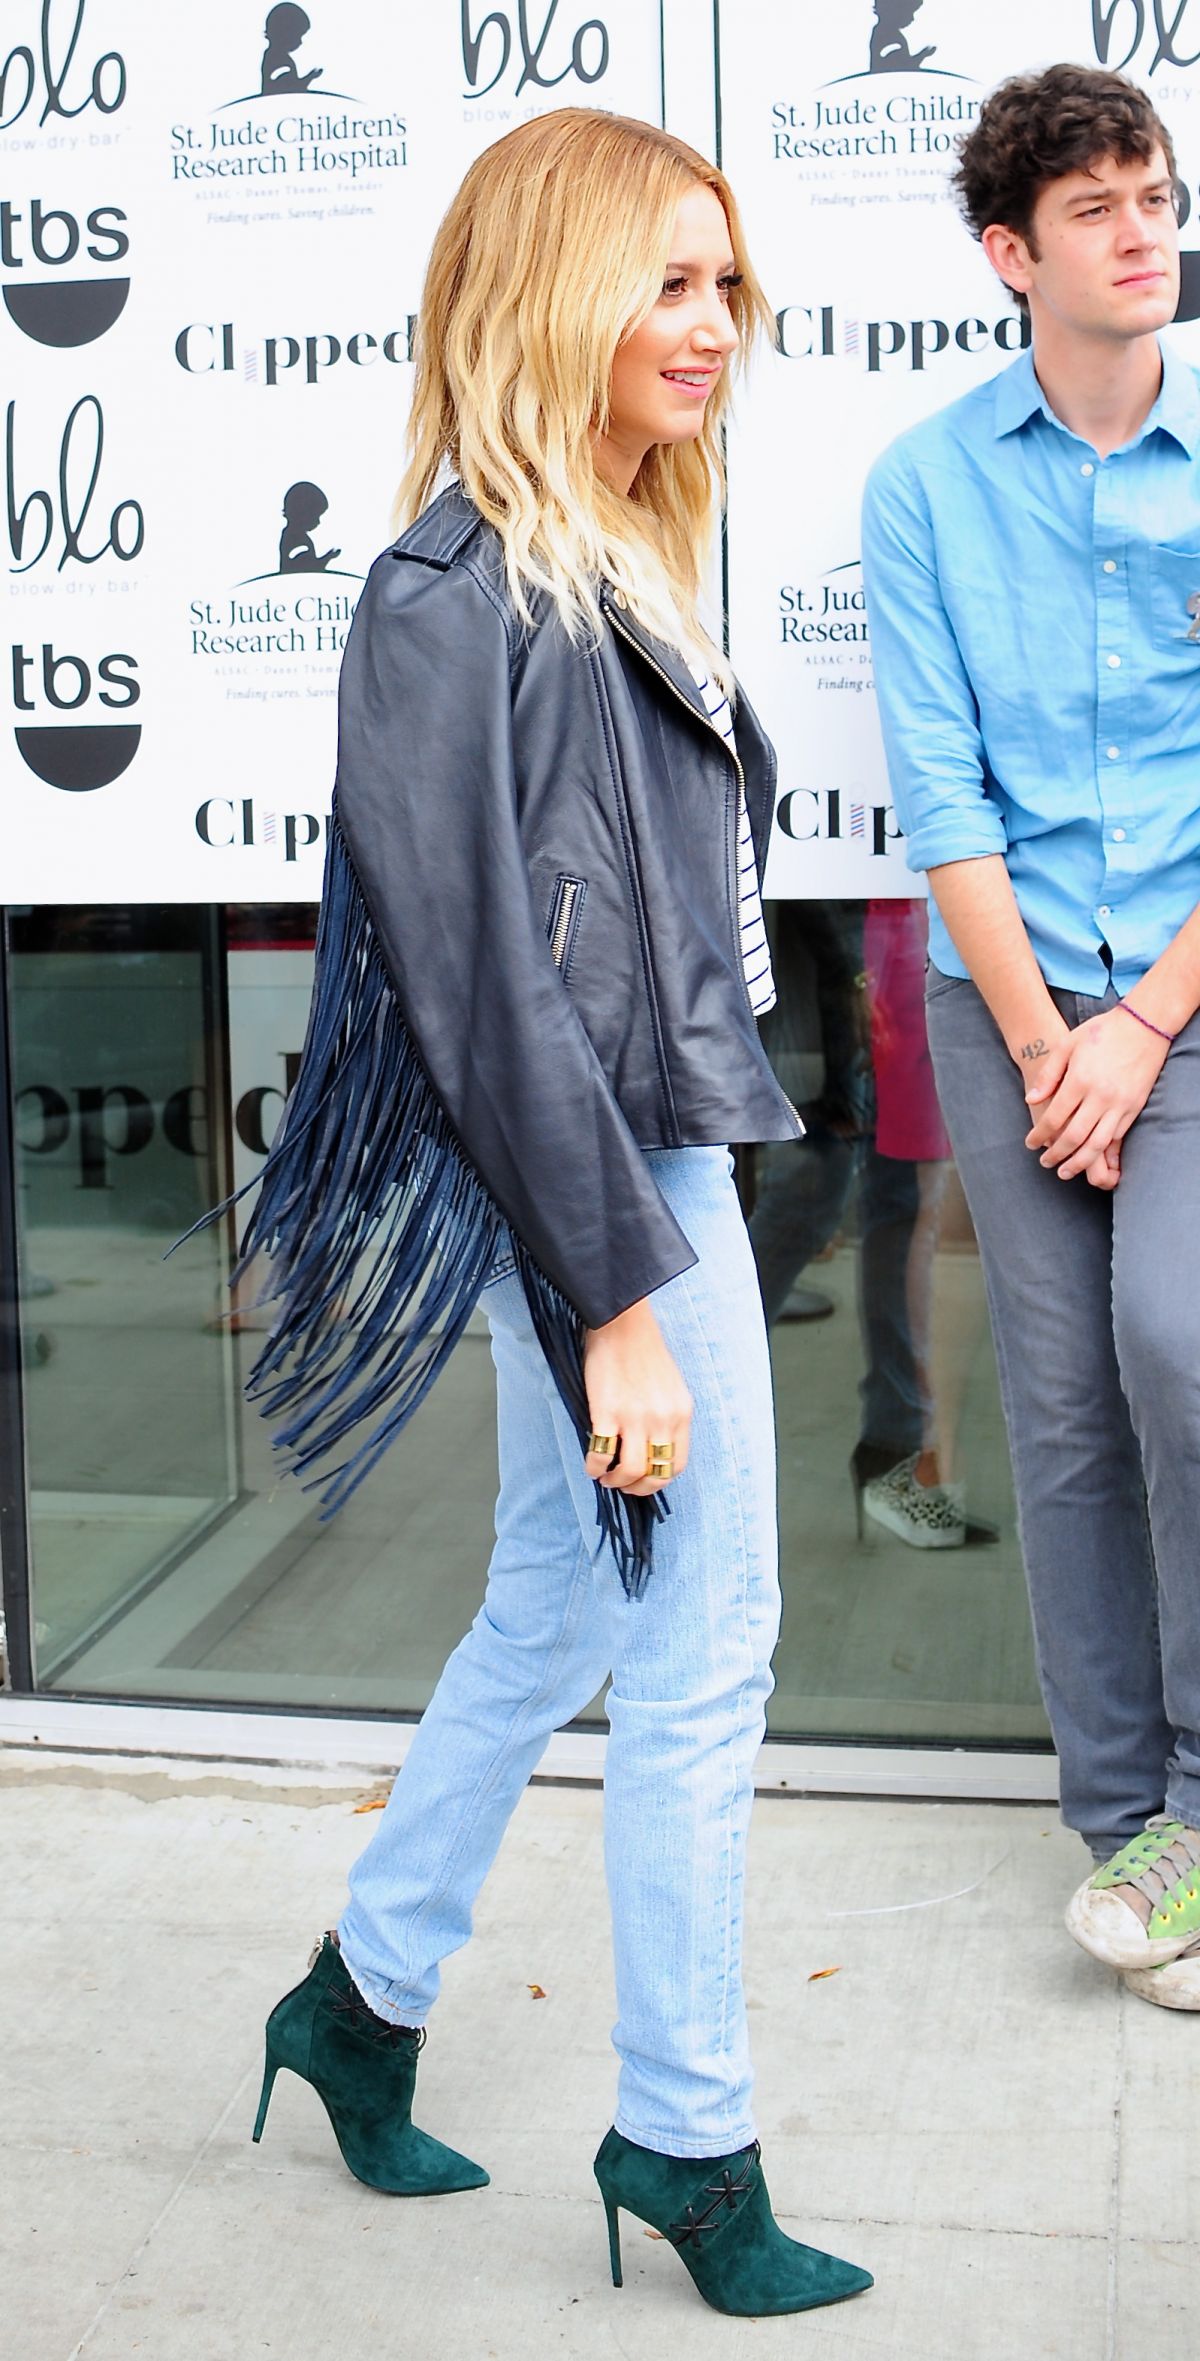 Ashley Tisdale in Jeans at Clipped Event